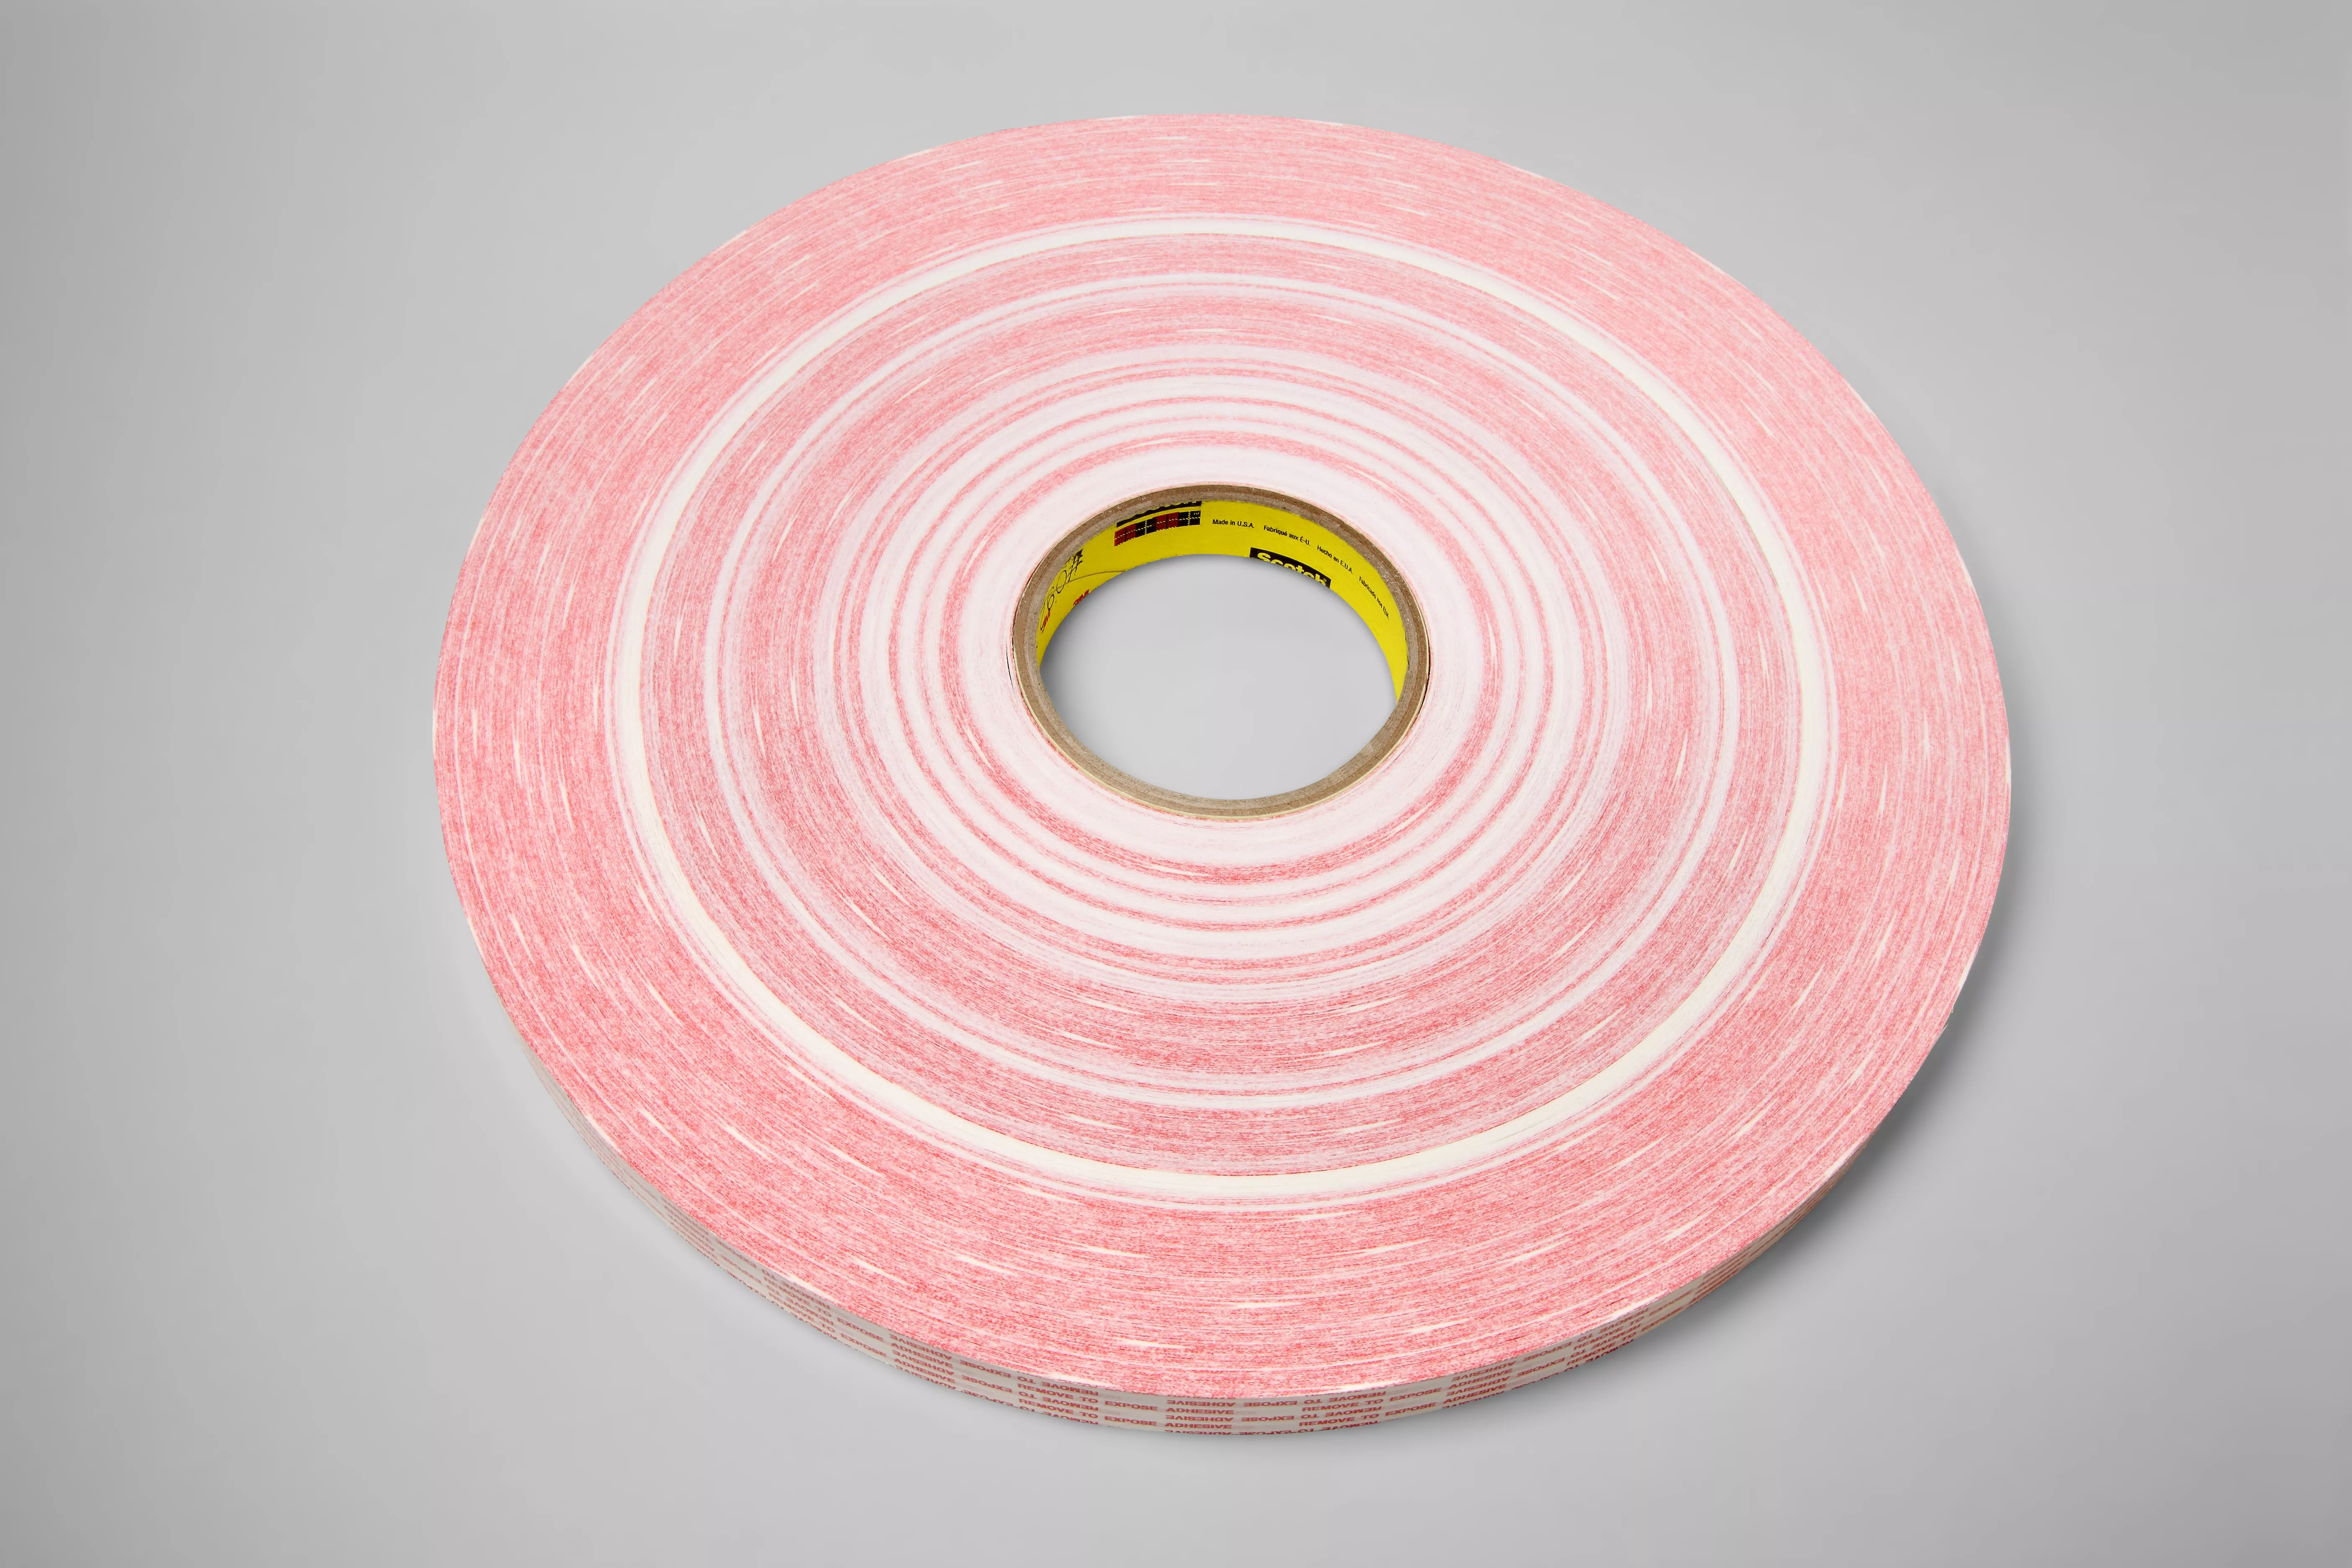 3M™ Adhesive Transfer Tape Extended Liner 920XL, Translucent, 3/4 in x
1000 yd, 1 mil, 9 Roll/Case